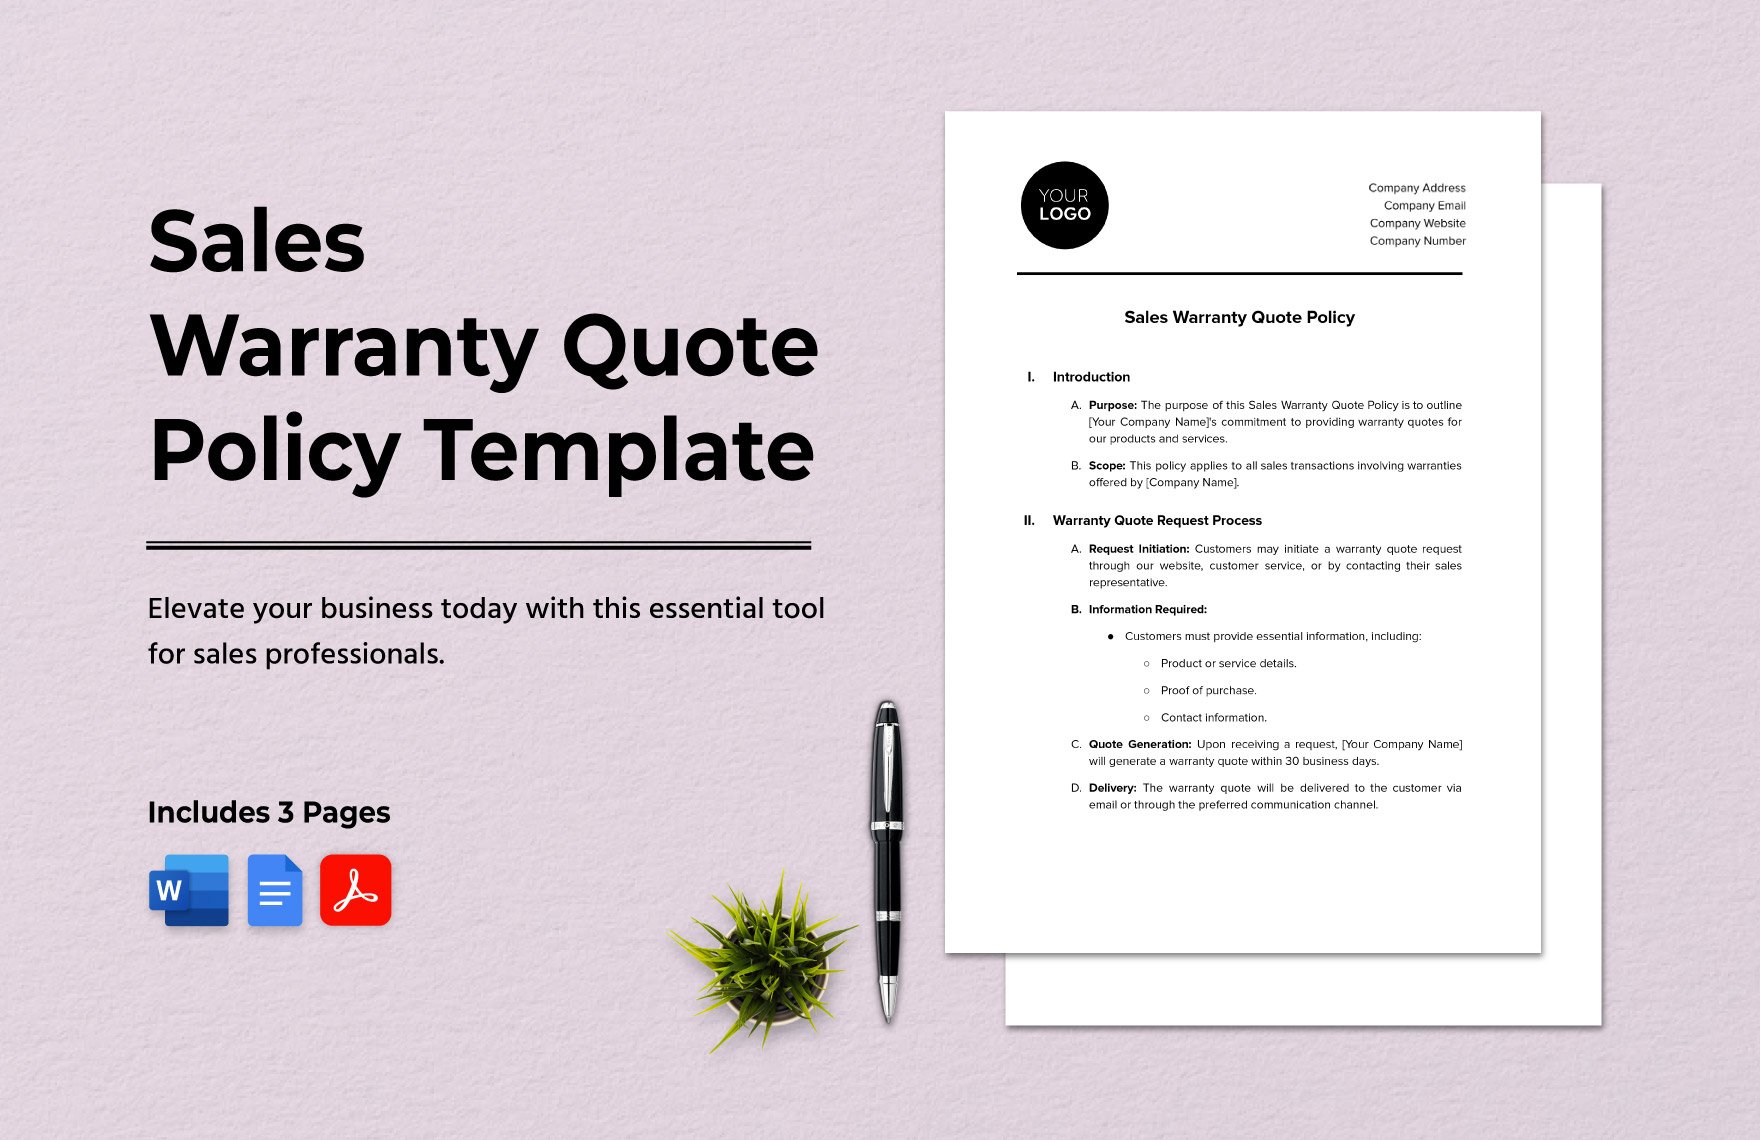 Sales Warranty Quote Policy Template